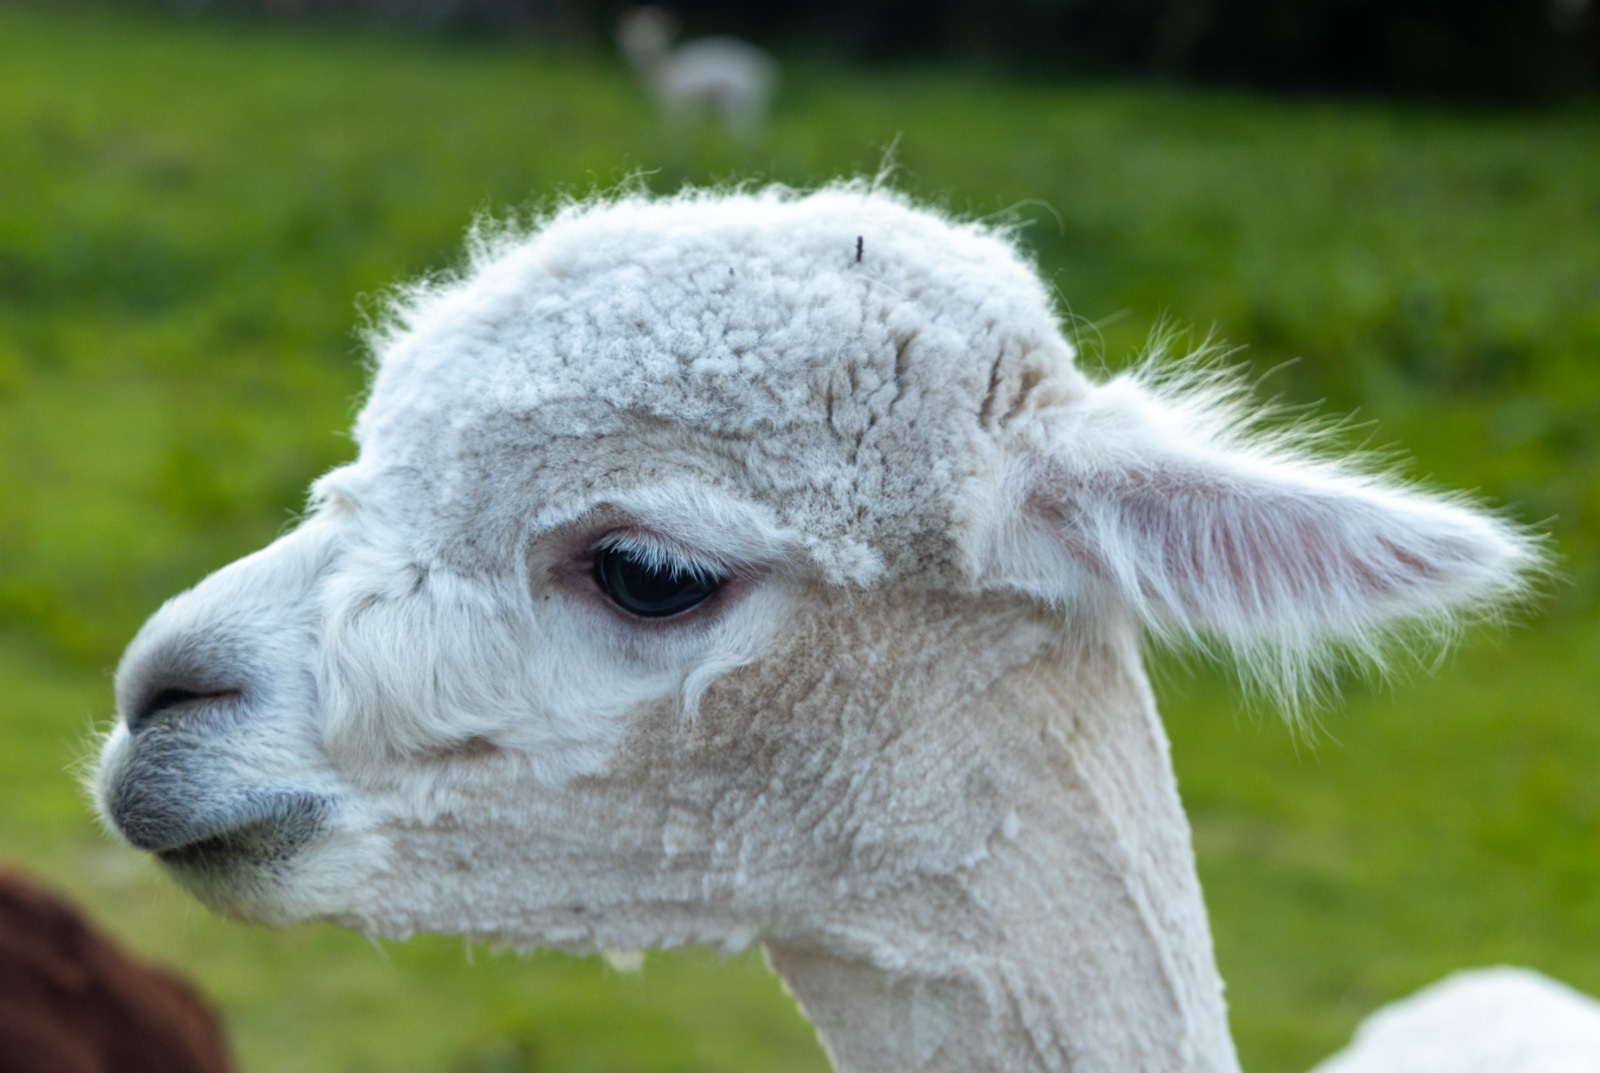 Auto-generated description: A close-up of a white alpaca standing in a grassy field with another alpaca blurred in the background.